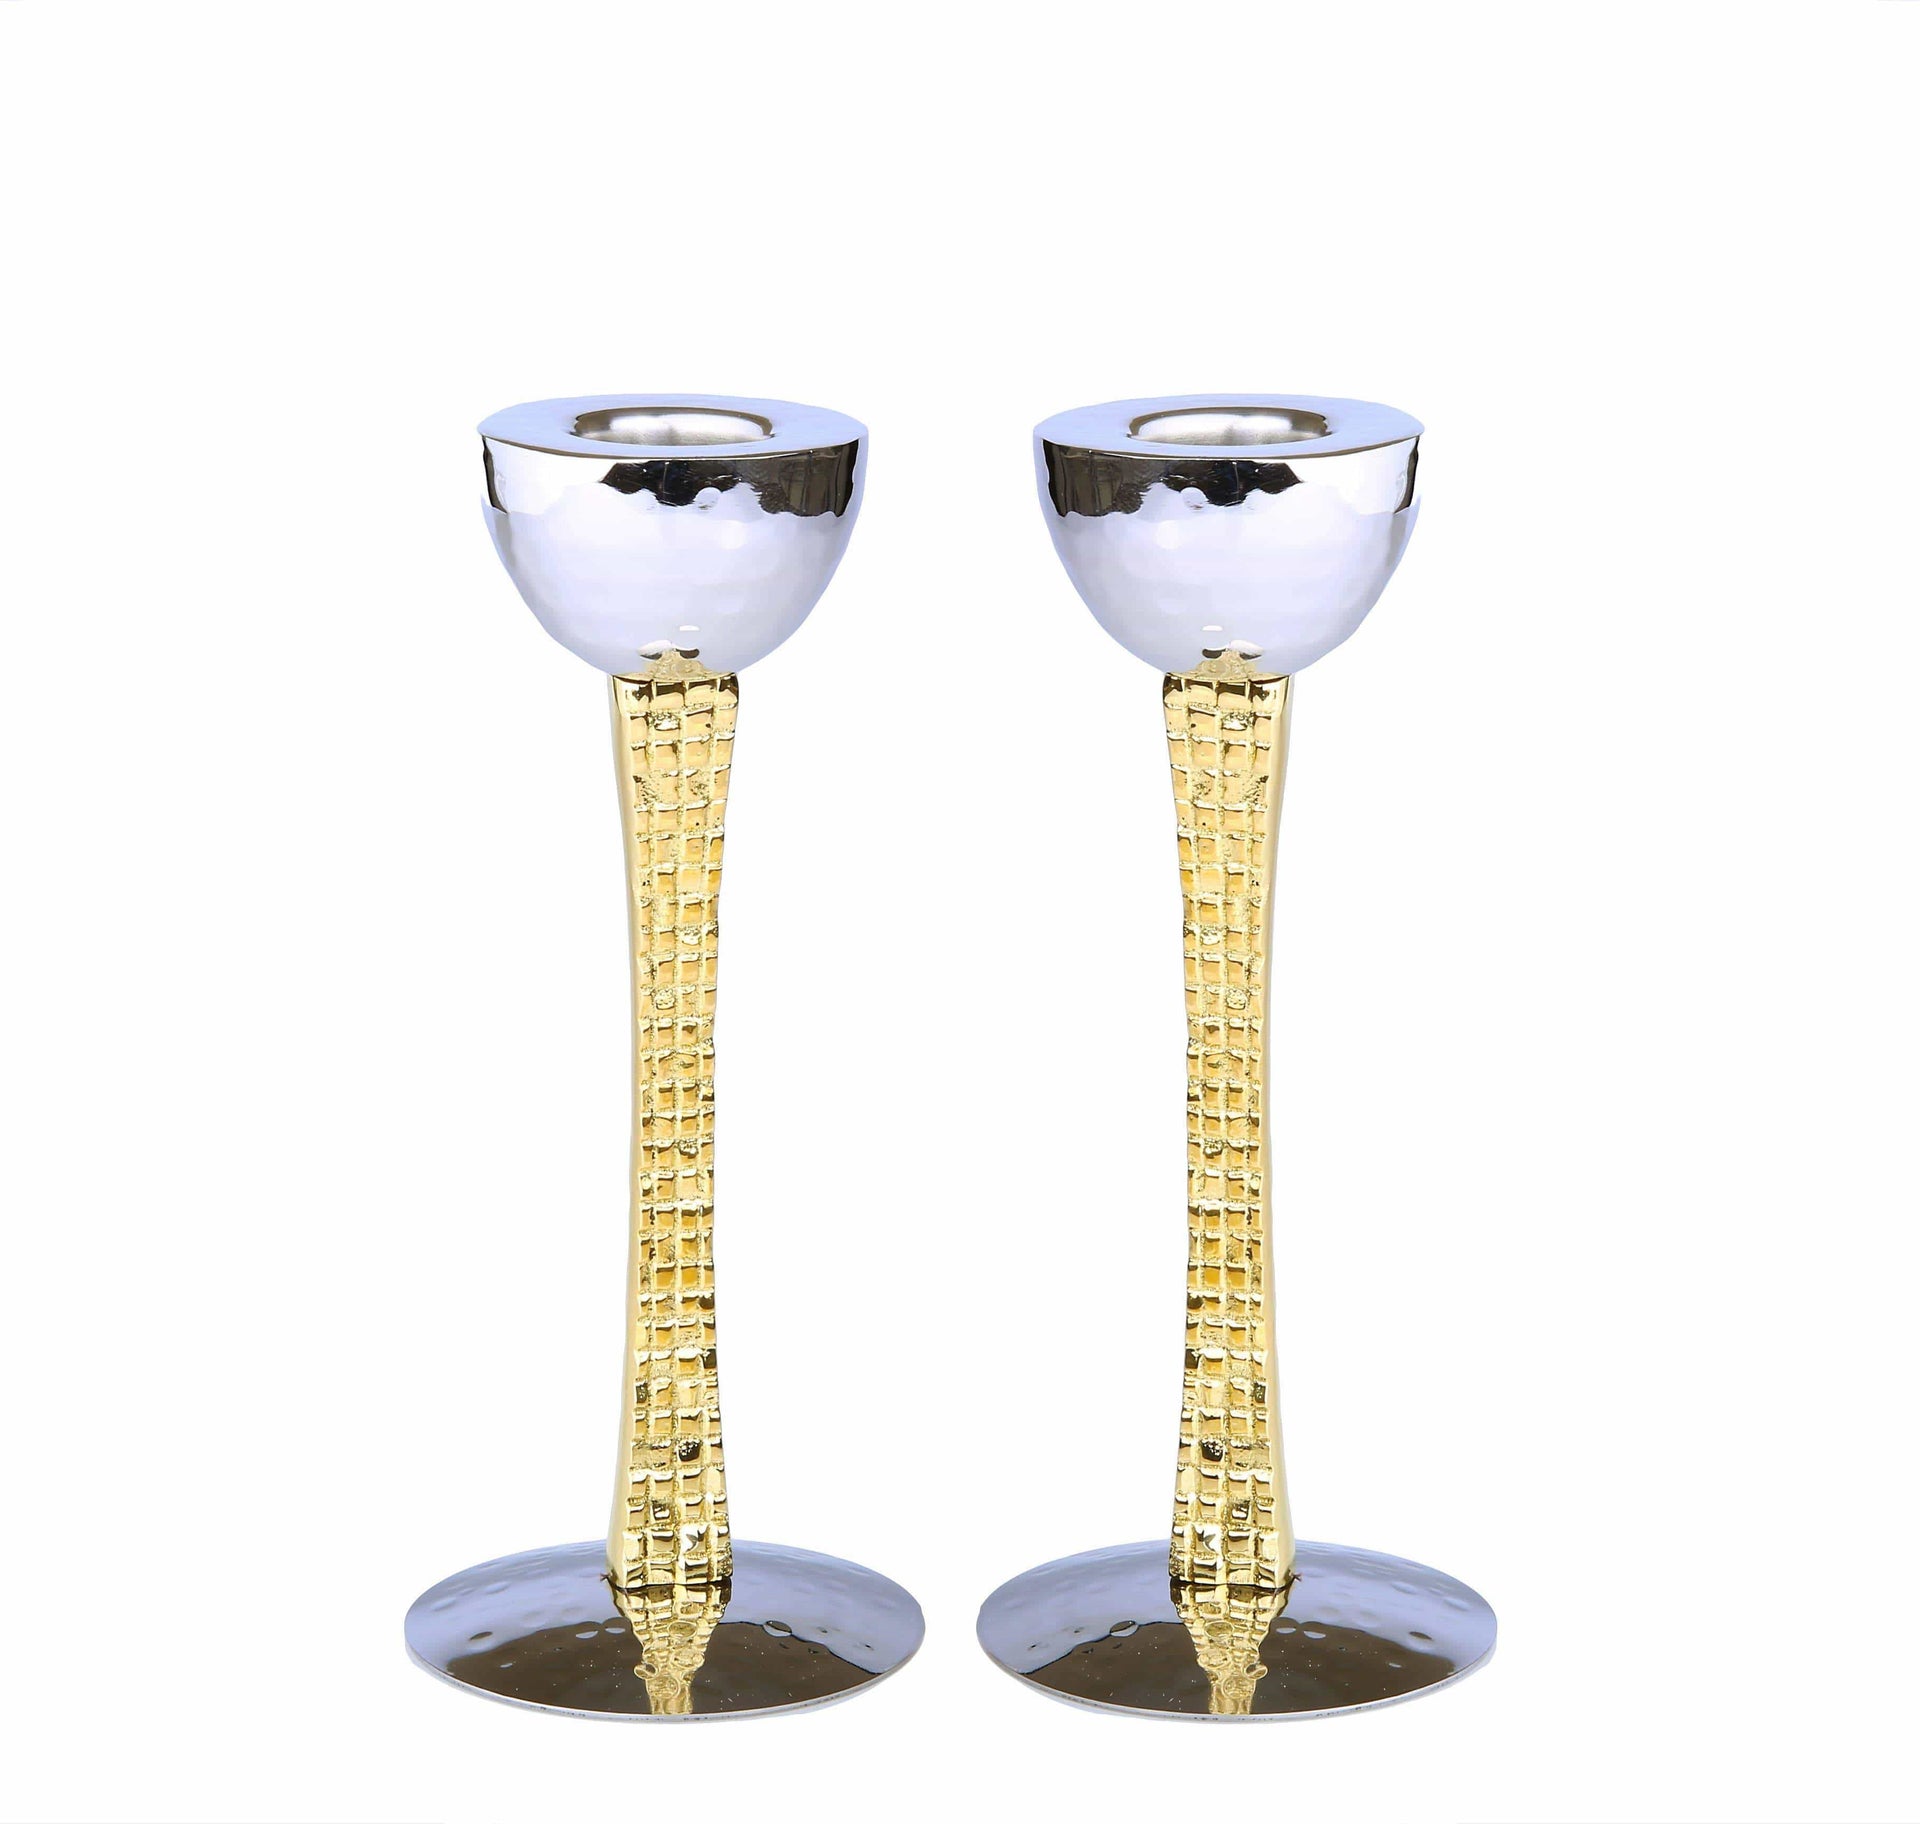 Classic Touch Decor Candlesticks Gold and Nickel Candlesticks with Mosaic Design